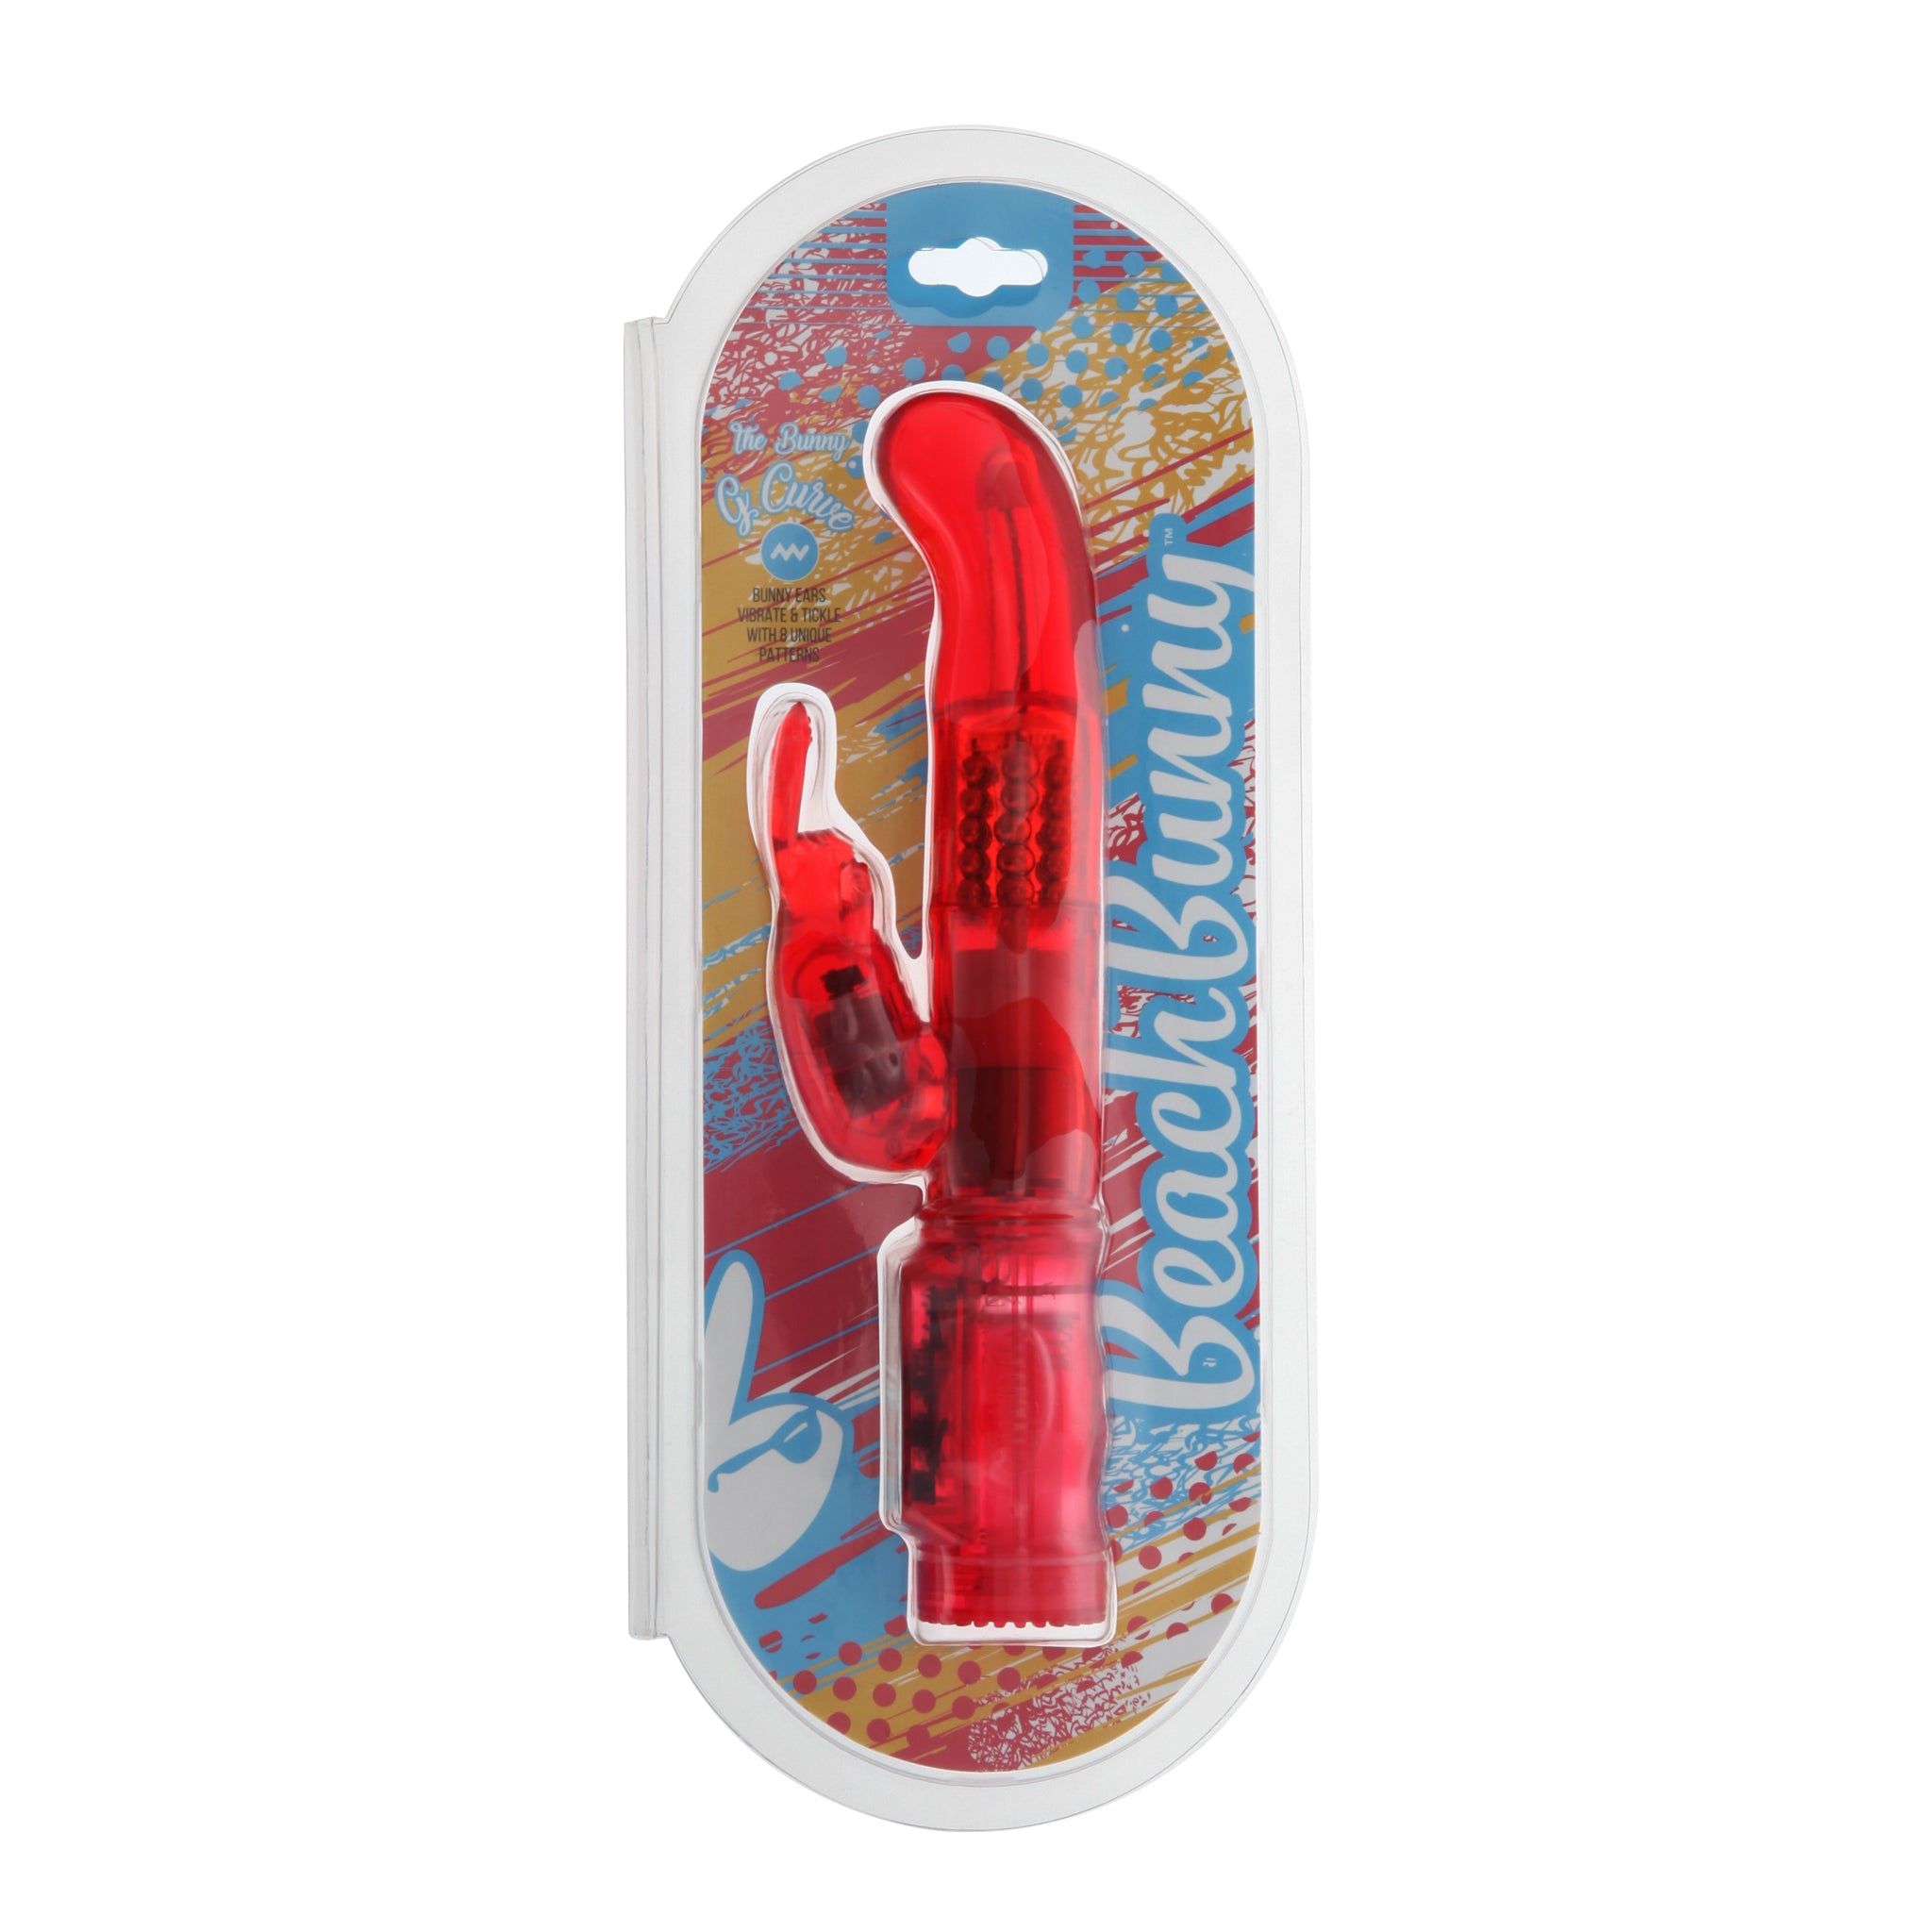 G-Spot Vibe with Beads and Tickler - Curve G-spot Rabbit